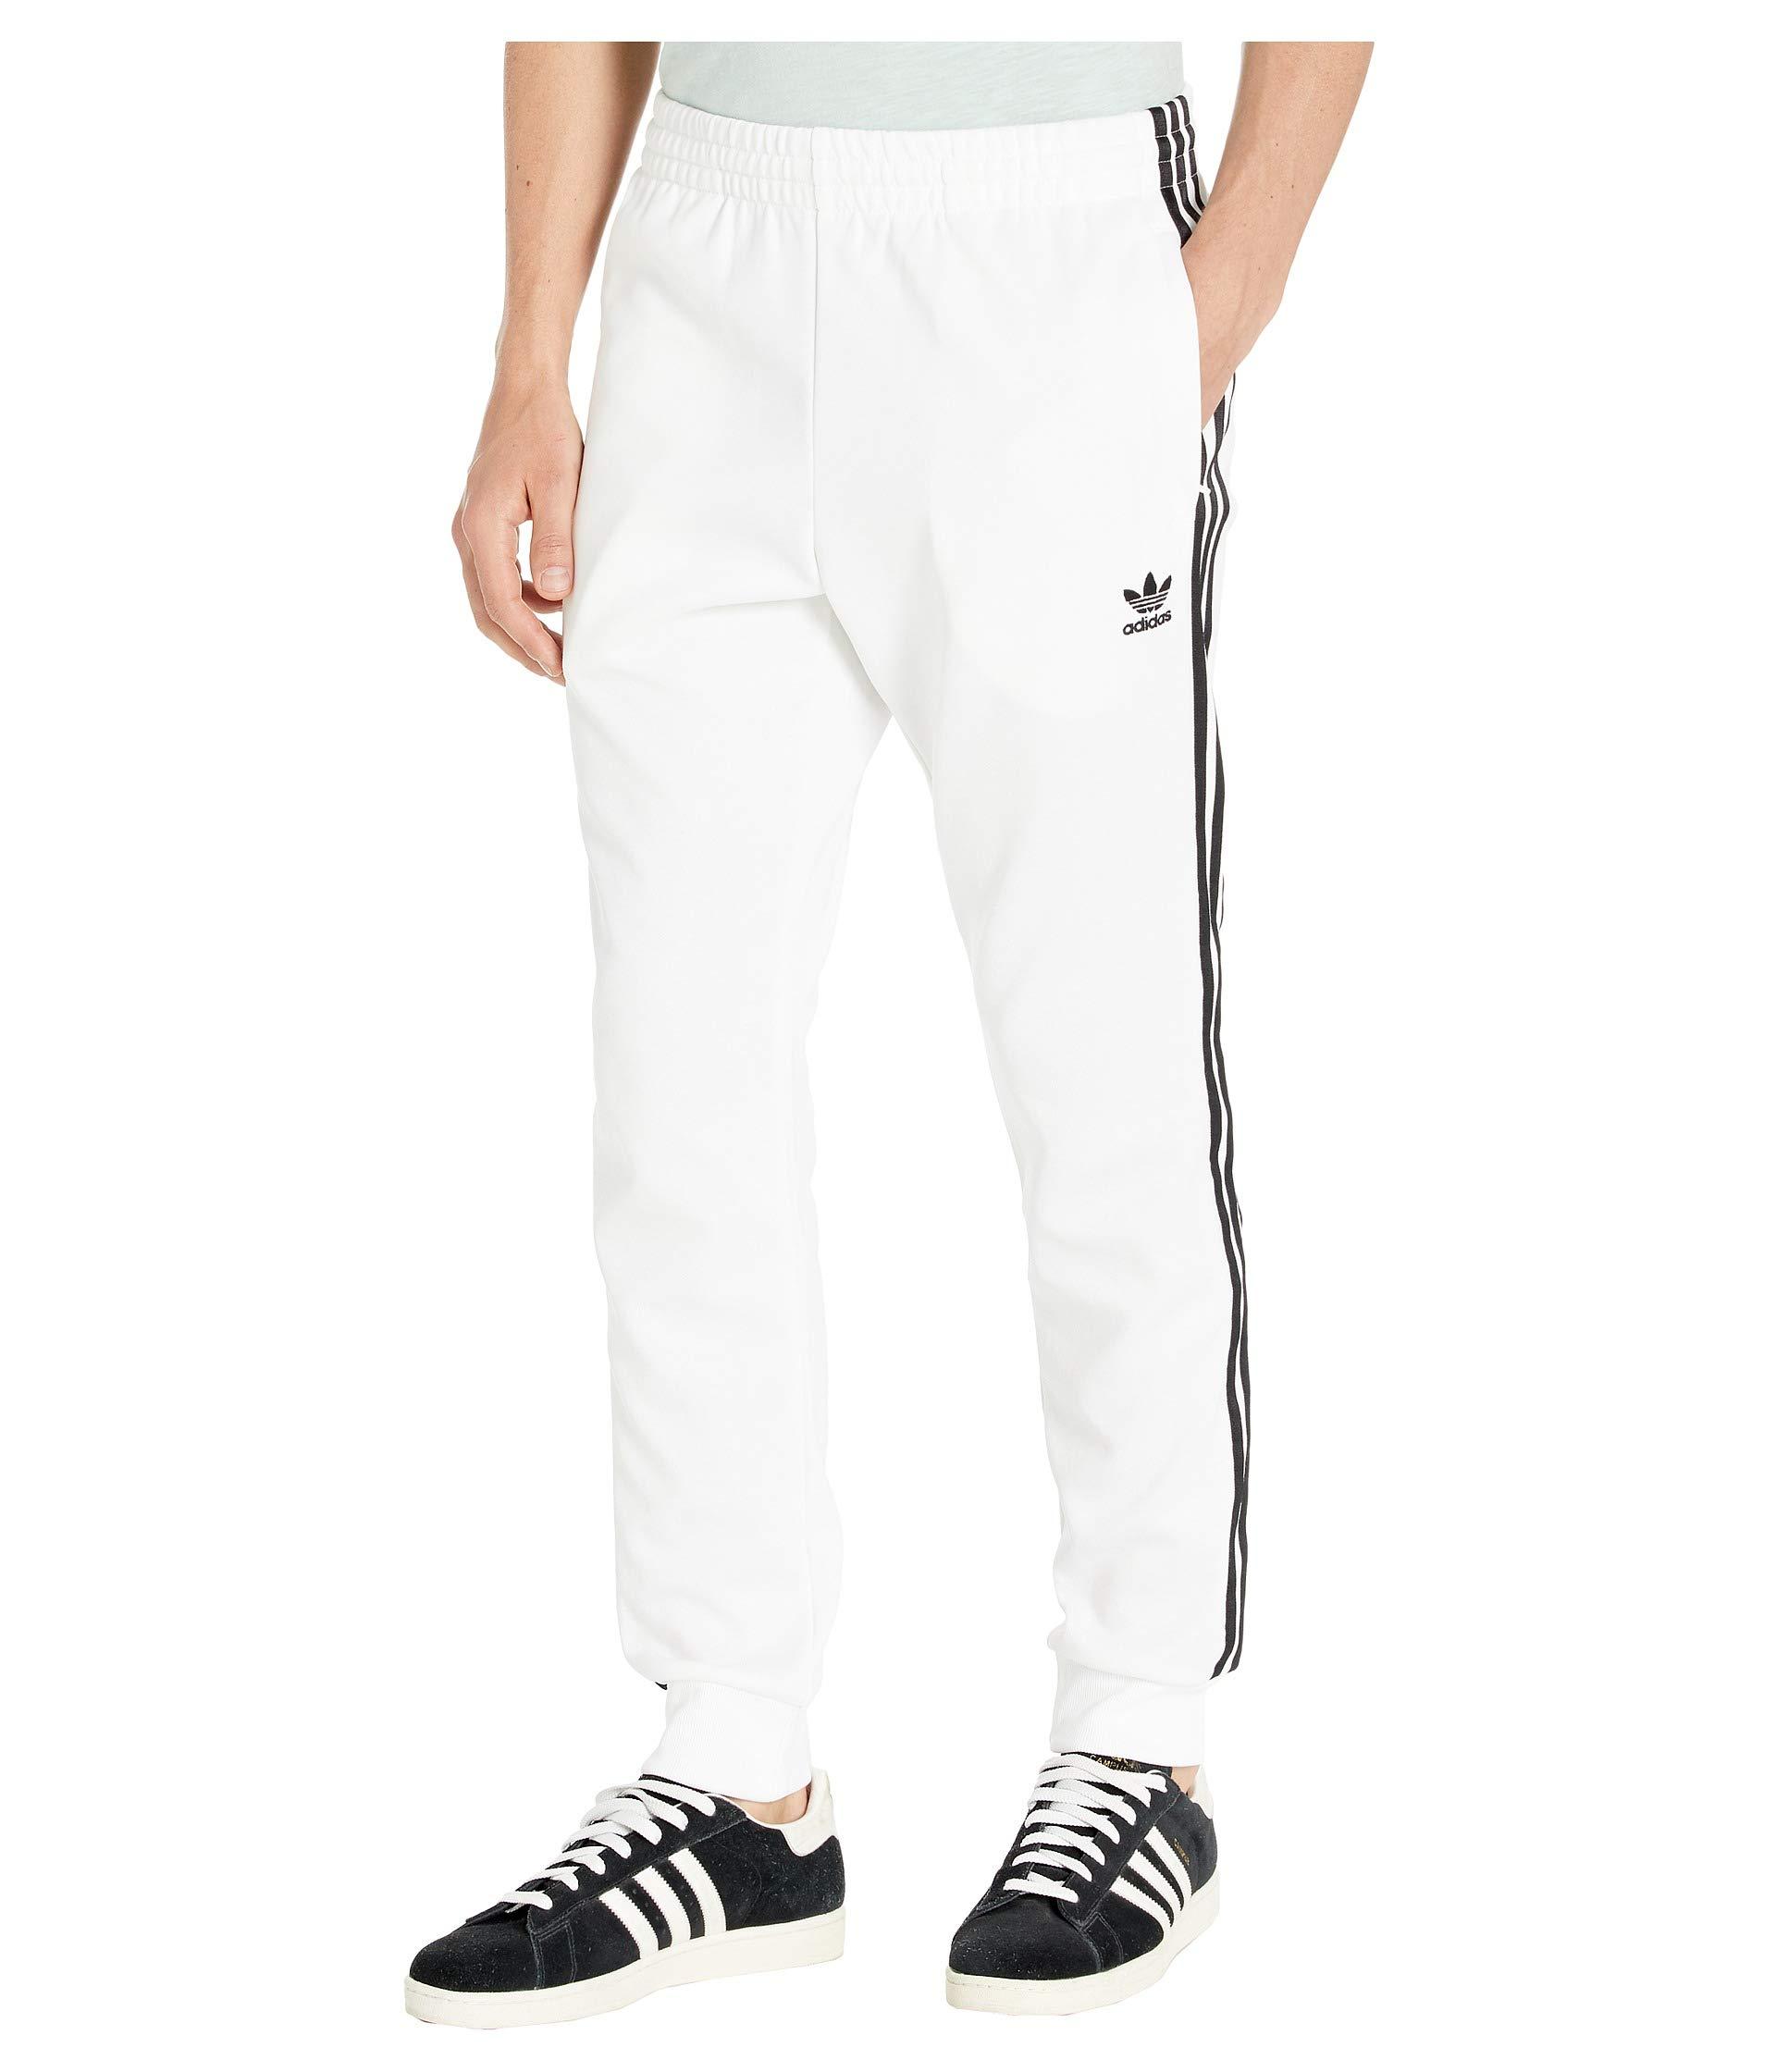 adidas Originals Synthetic Superstar Track Pants in White for Men - Lyst